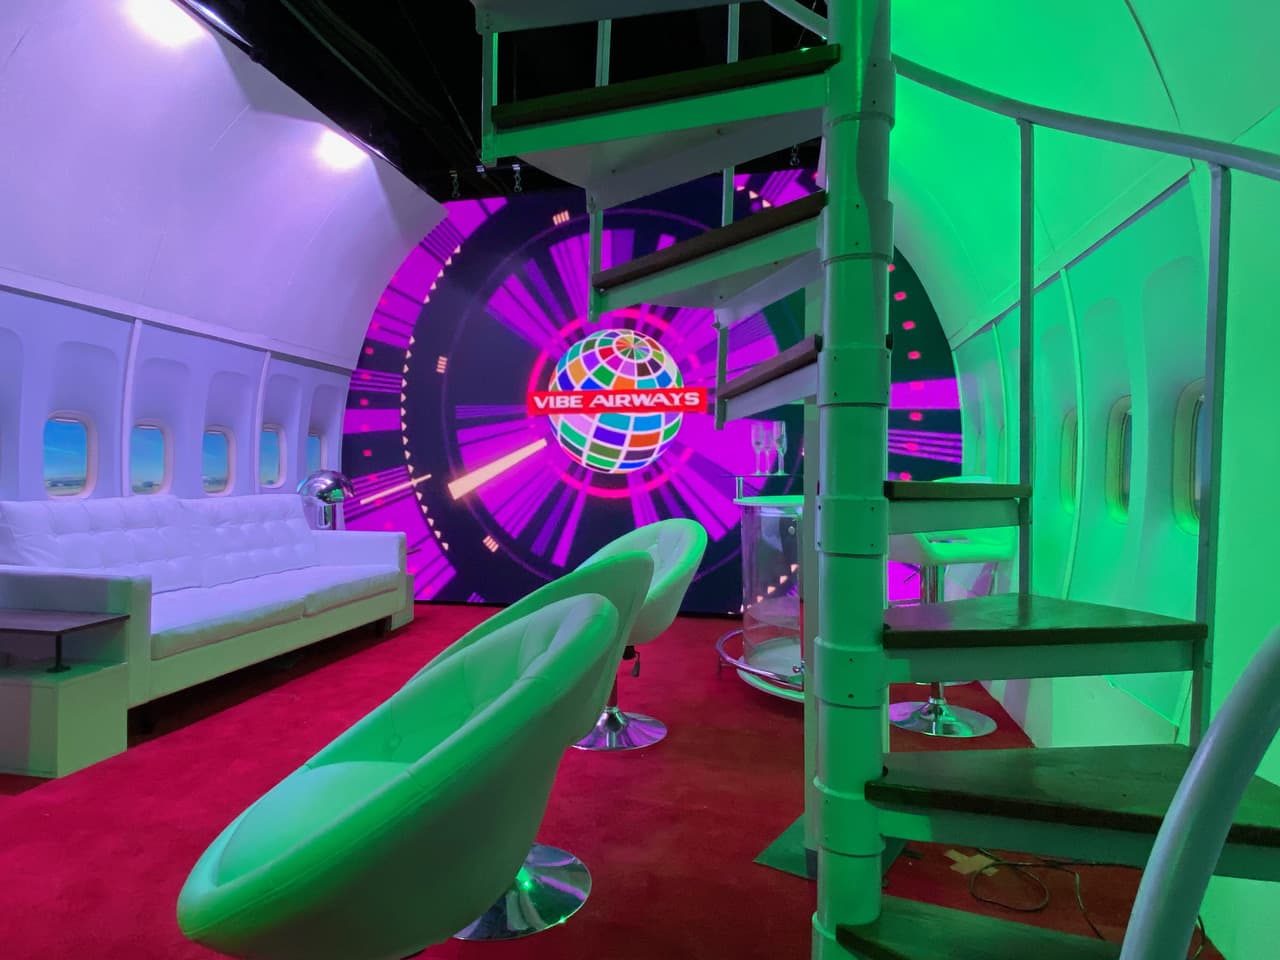 &quot;Vibe Airways,&quot; one of 13 themed rooms in the art installation &quot;Go Pixel Yourself.&quot; (Courtesy John Carter)